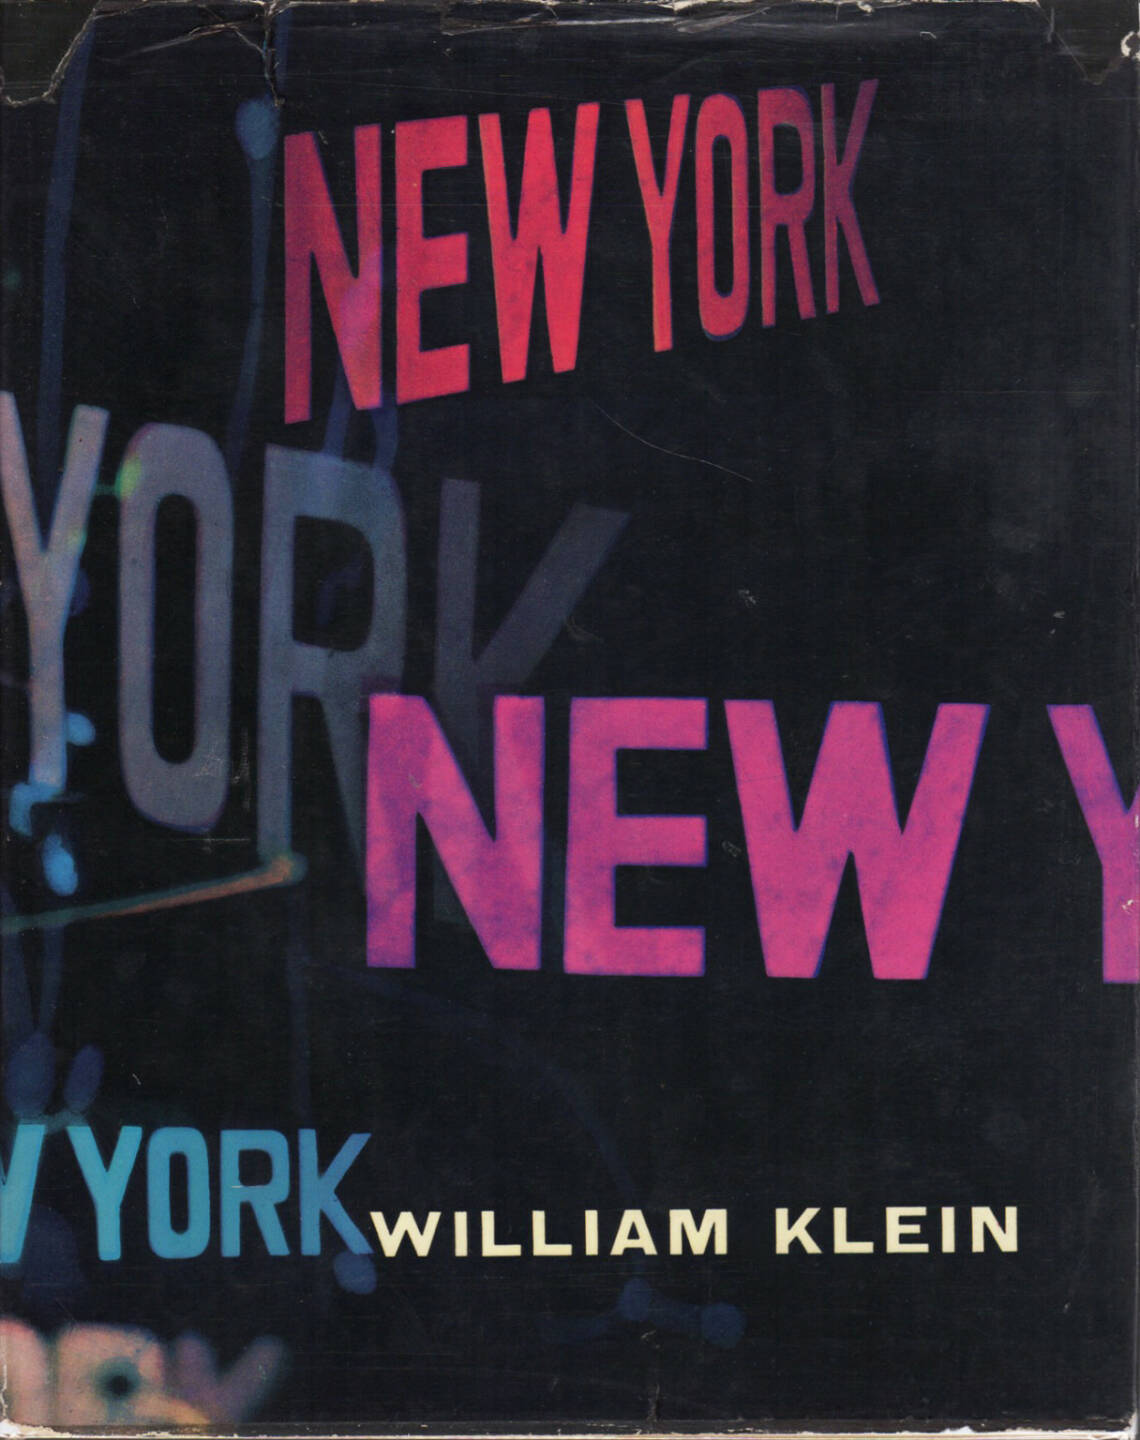 William Klein - Life Is Good and Good For You In New York: Trance Witness Revels, Giangiacomo Feltrinelli Editore 1956, Cover - http://josefchladek.com/book/william_klein_-_life_is_good_and_good_for_you_in_new_york_trance_witness_revels